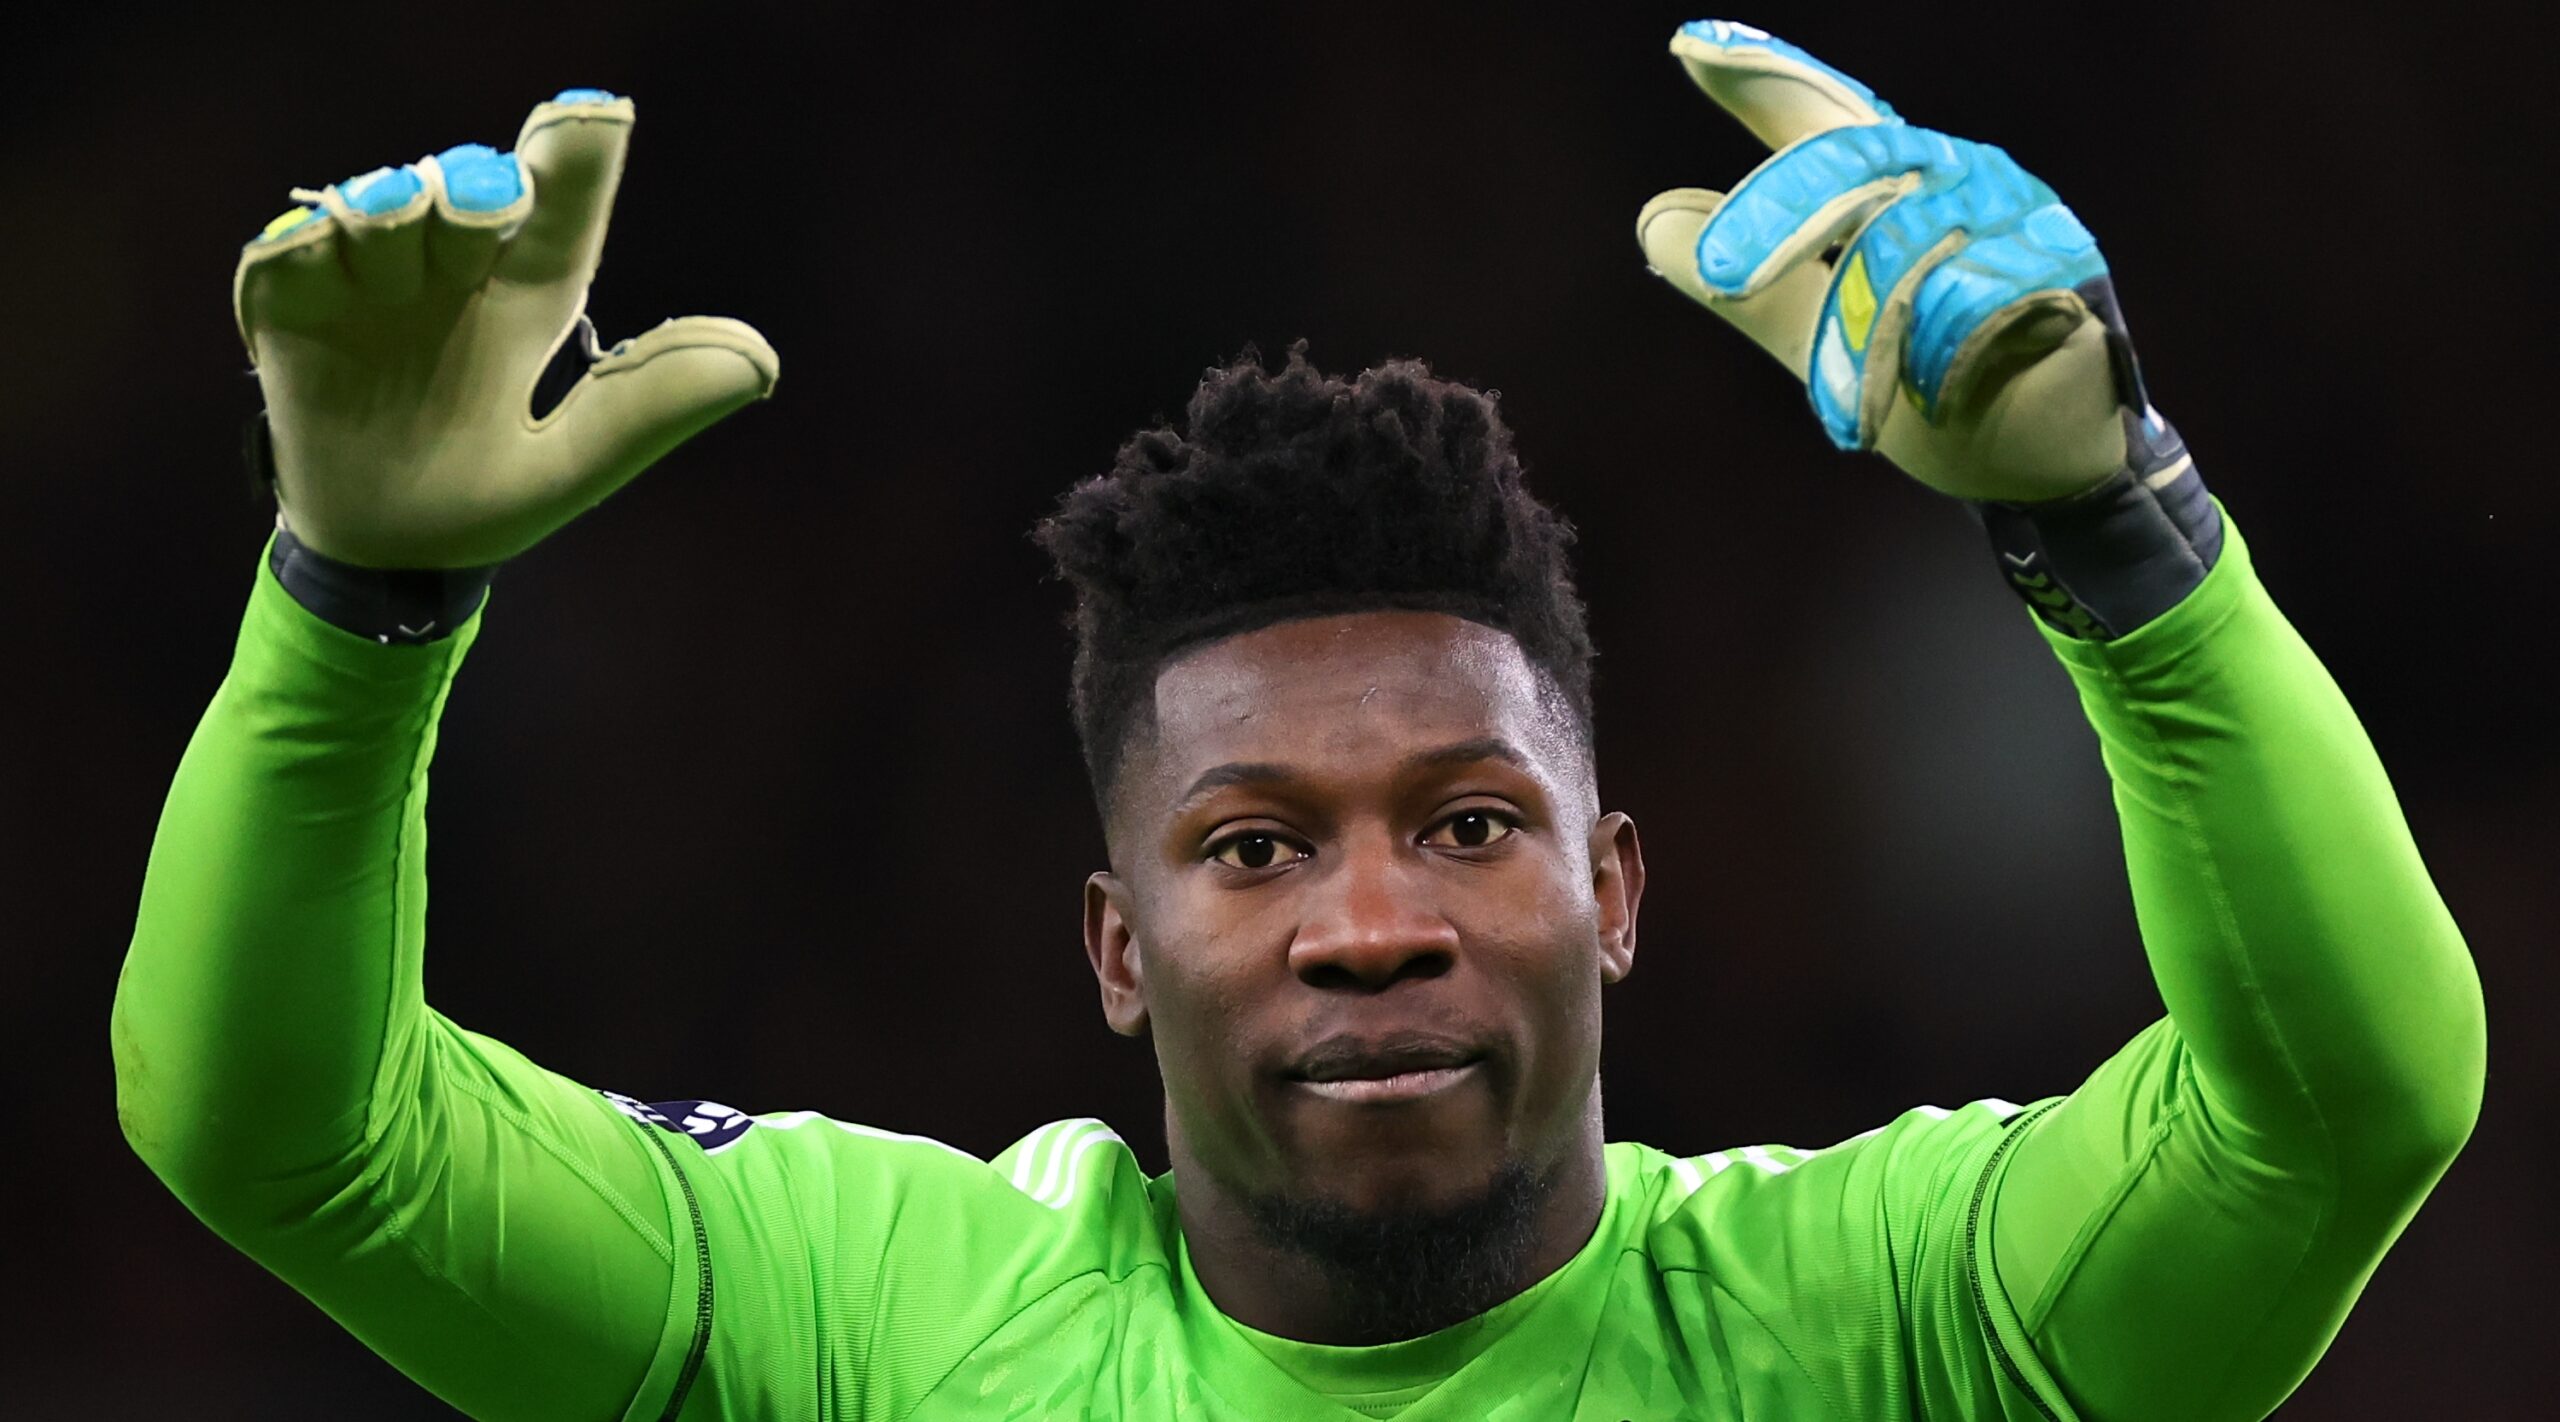 Manchester United star Andre Onana makes sensational quit threat amid heated row: report